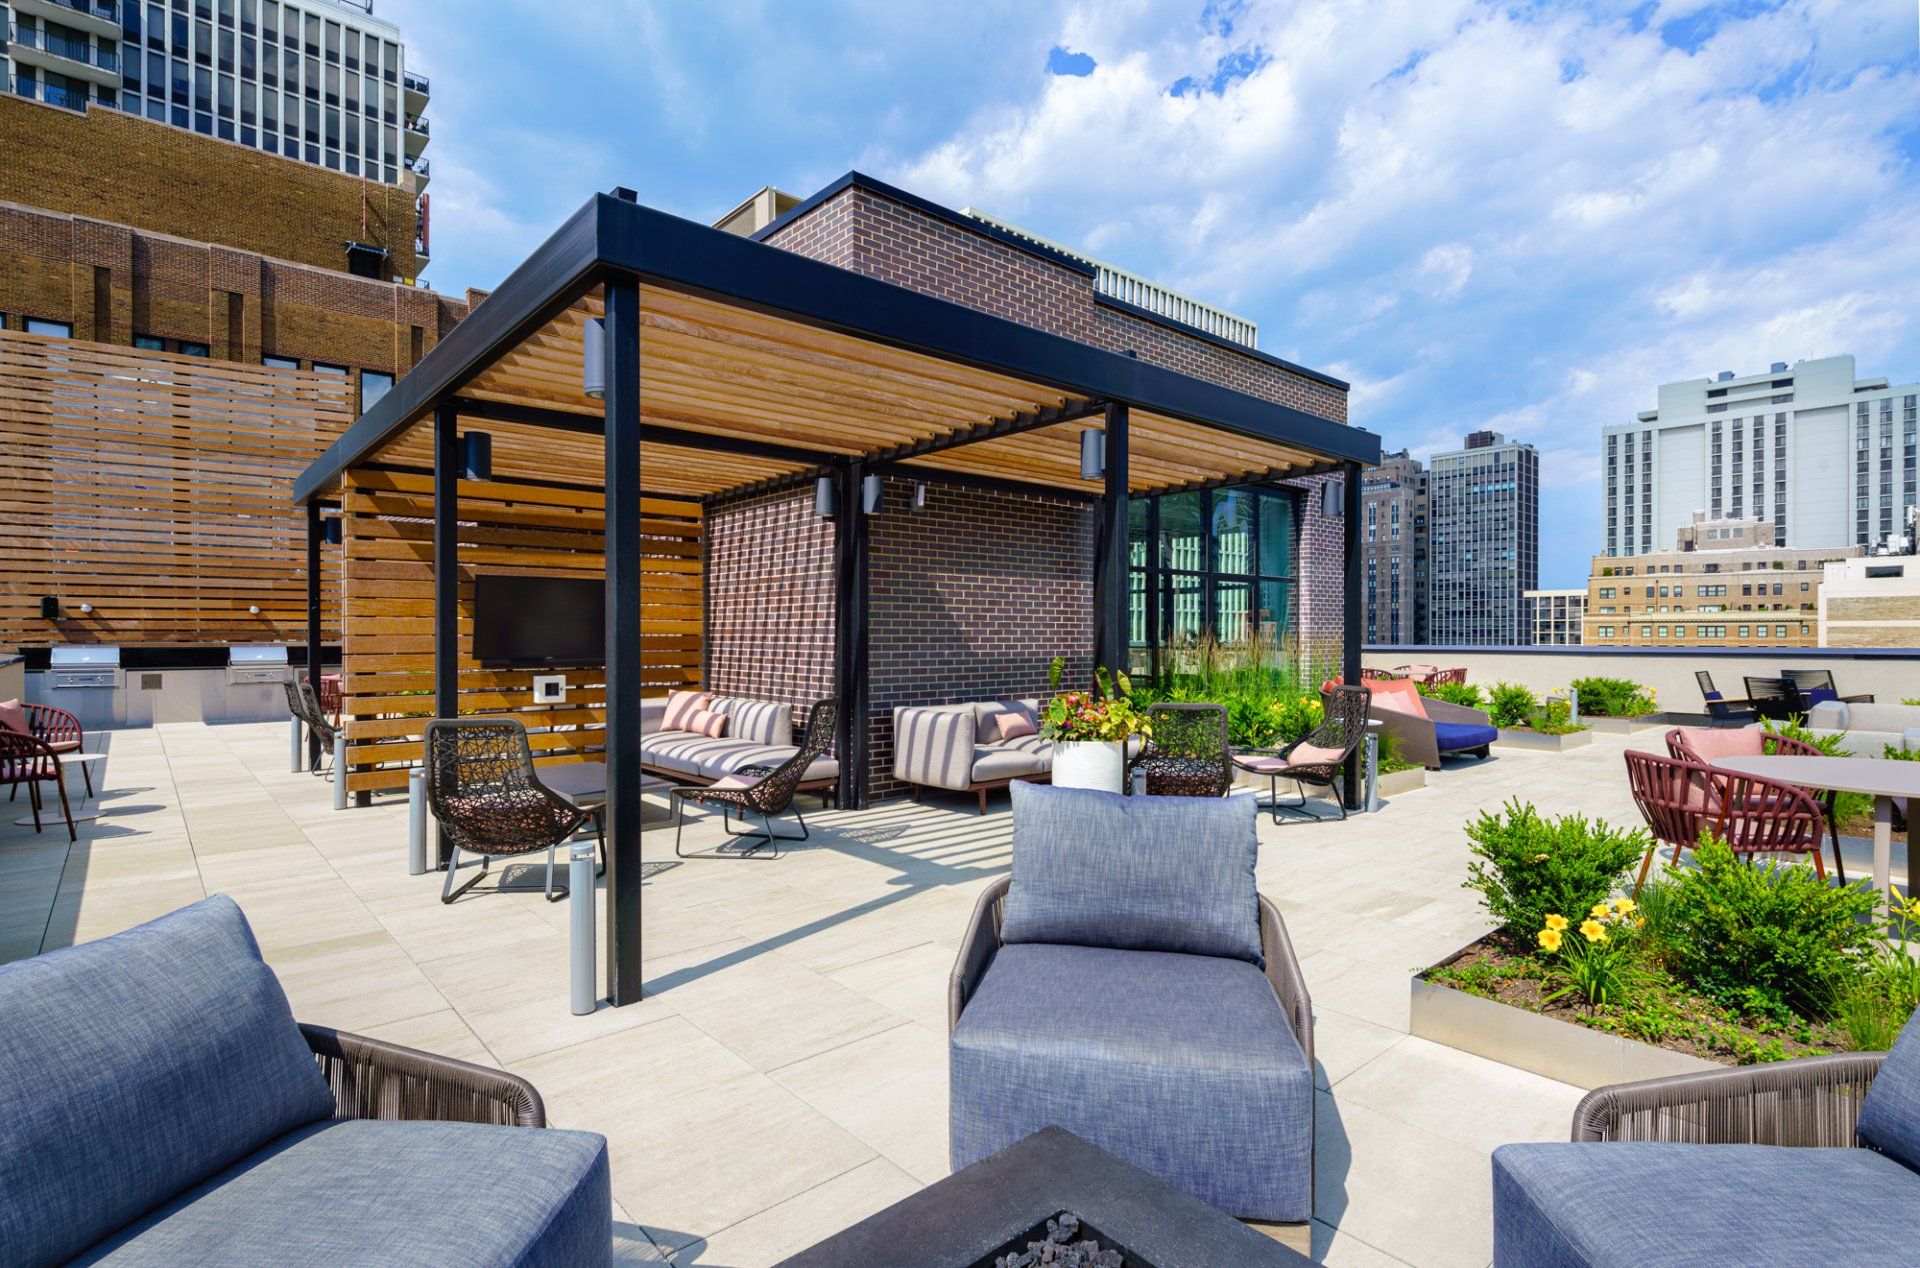 Apartment community with a roofdeck at Gild Apartment.